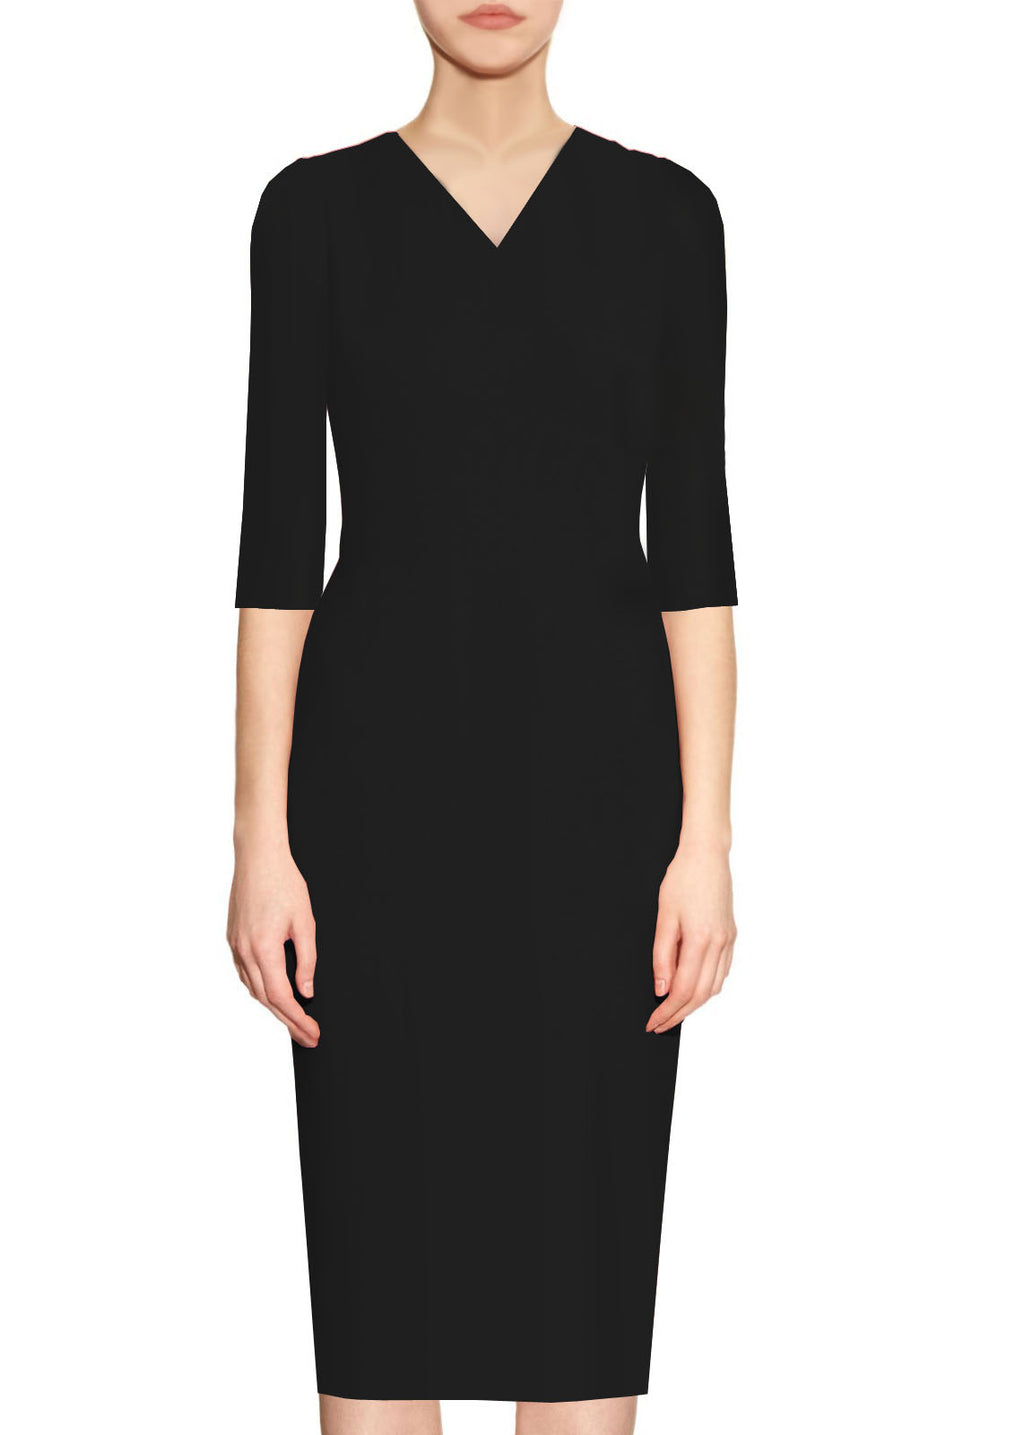 Lausanne Sheath Dress with 3/4 Sleeves